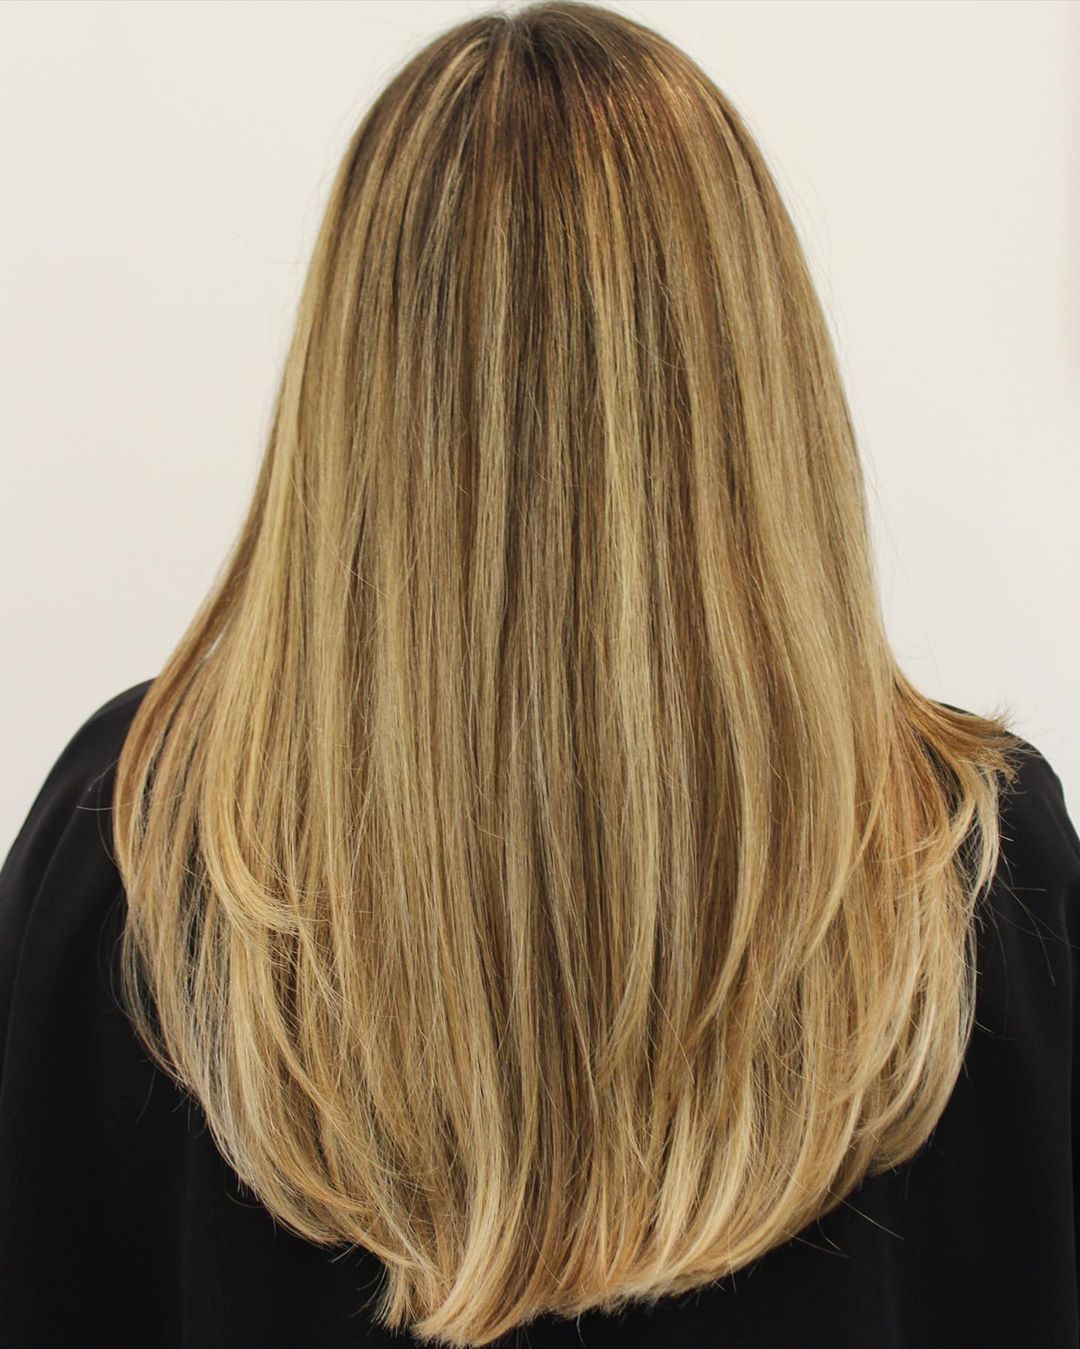 18 Flattering Beige Blonde Hair Color Ideas for Every Skin Tone